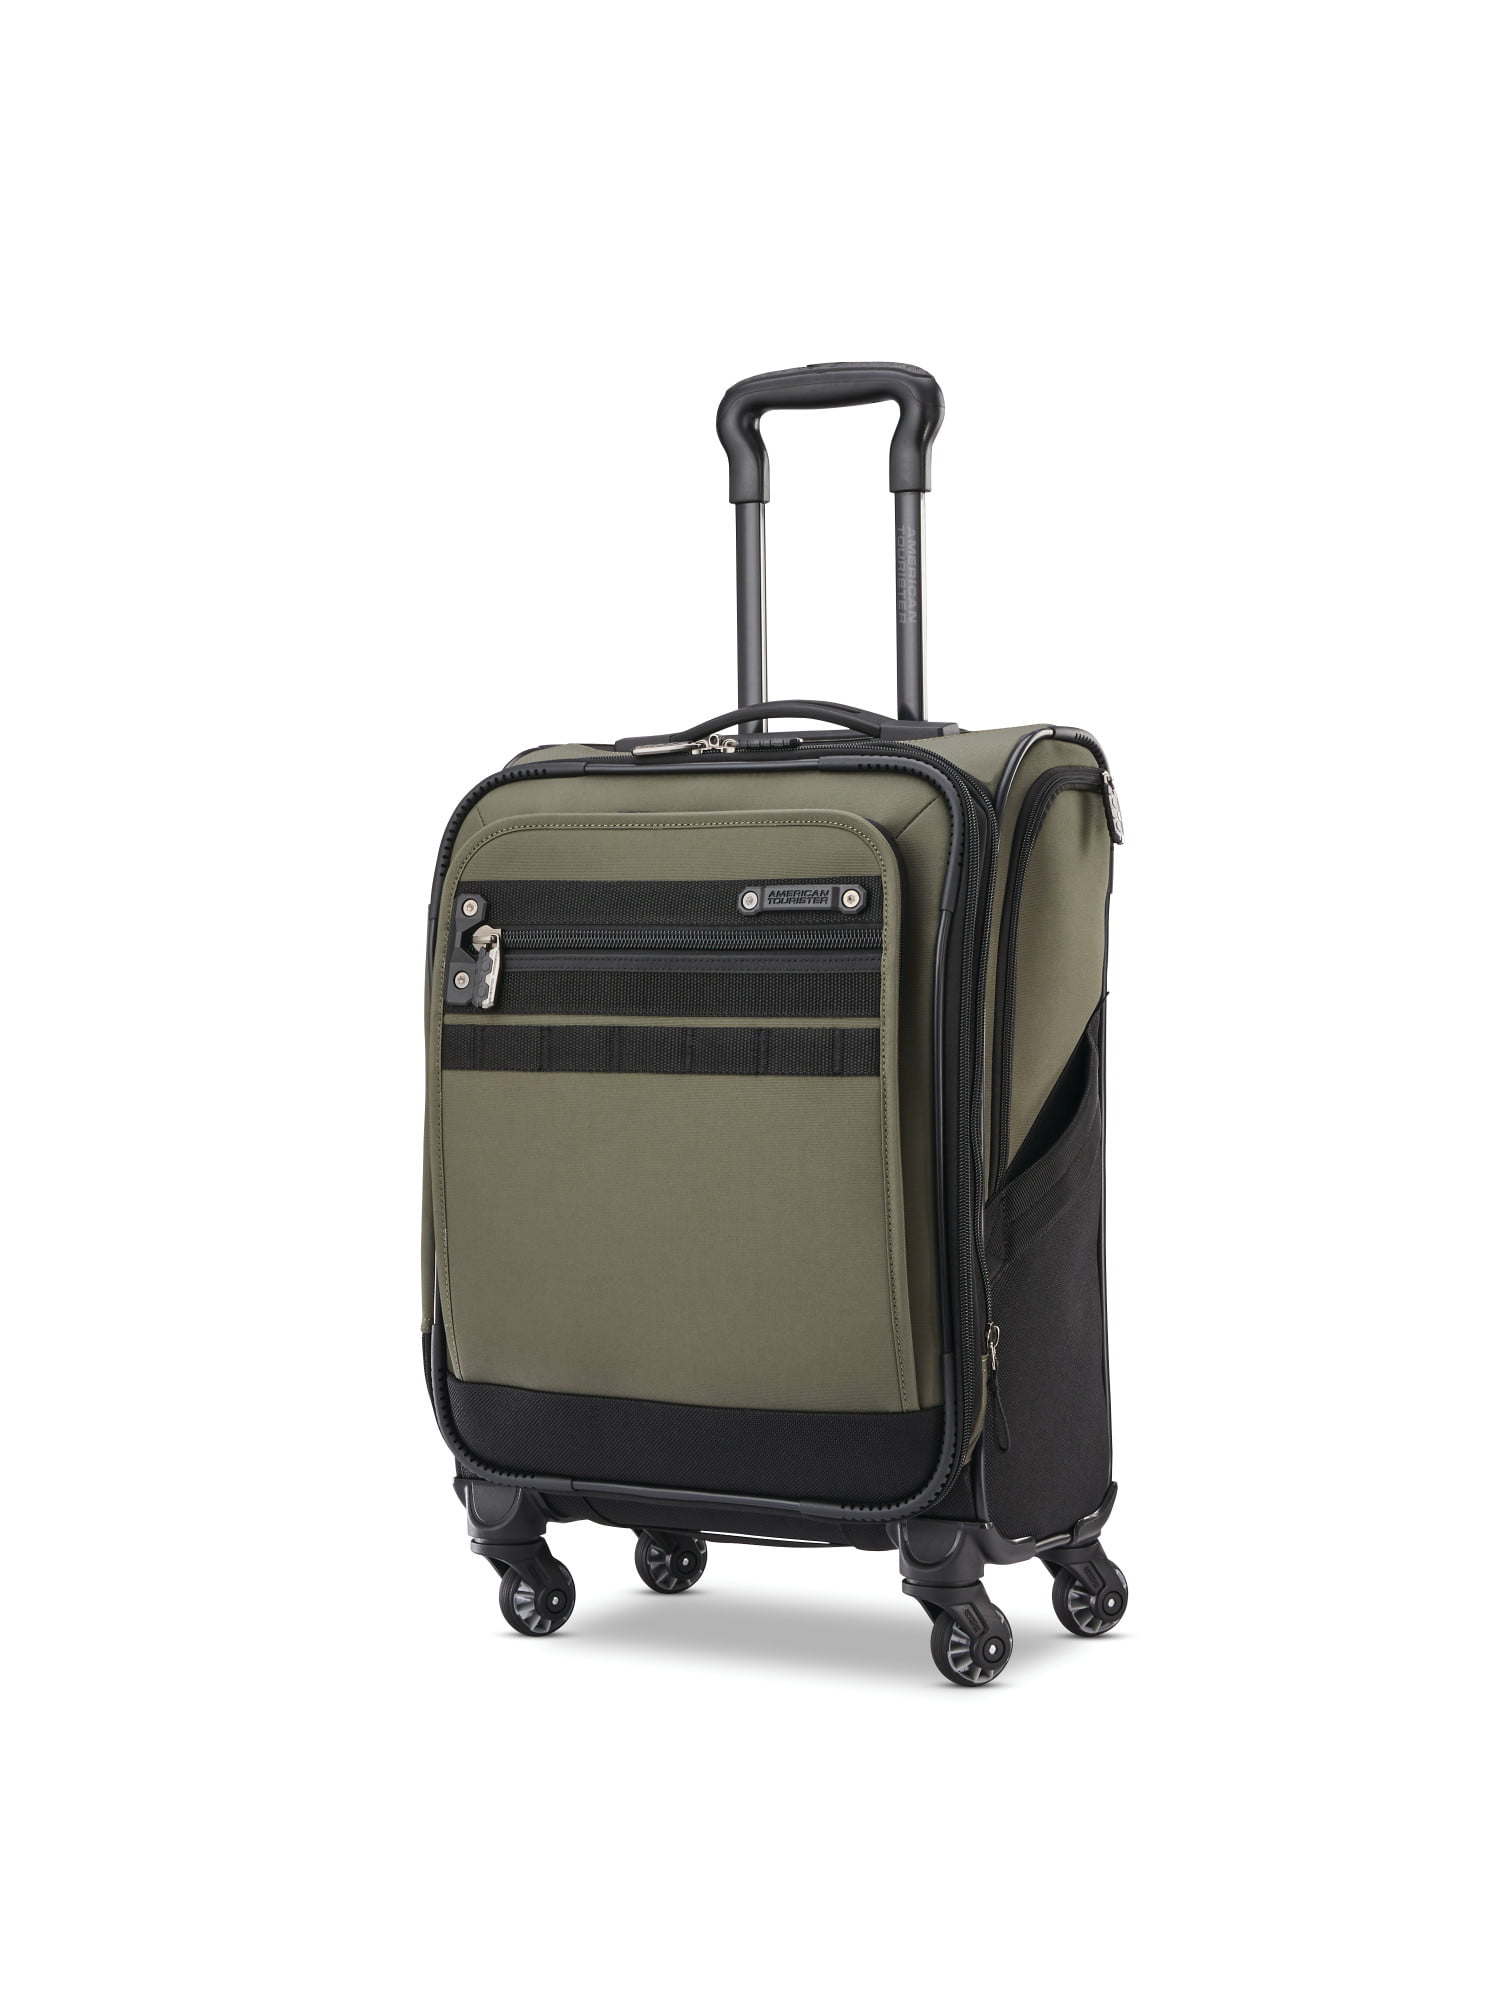 American Tourister Ally 19" Softside Carryon Spinner Luggage